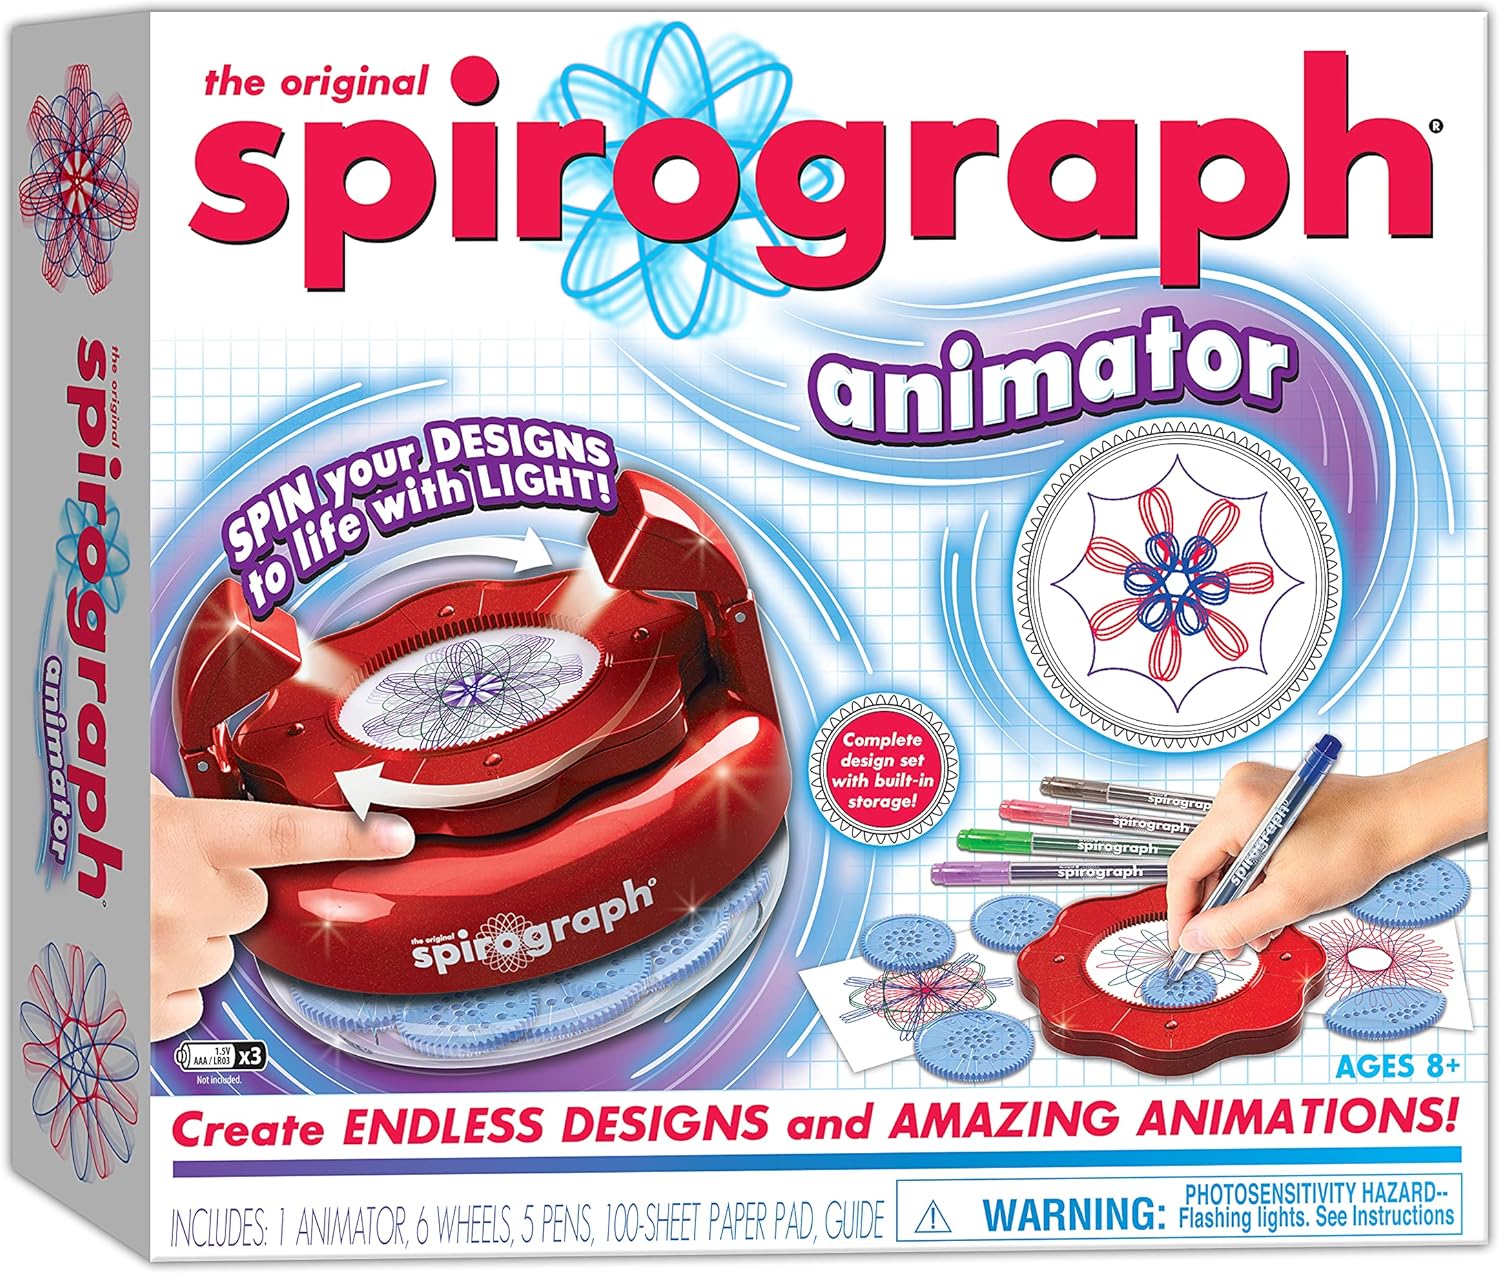 Spirograph ANIMATOR Create Amazing 3D Designs With Lights & Spinning Action